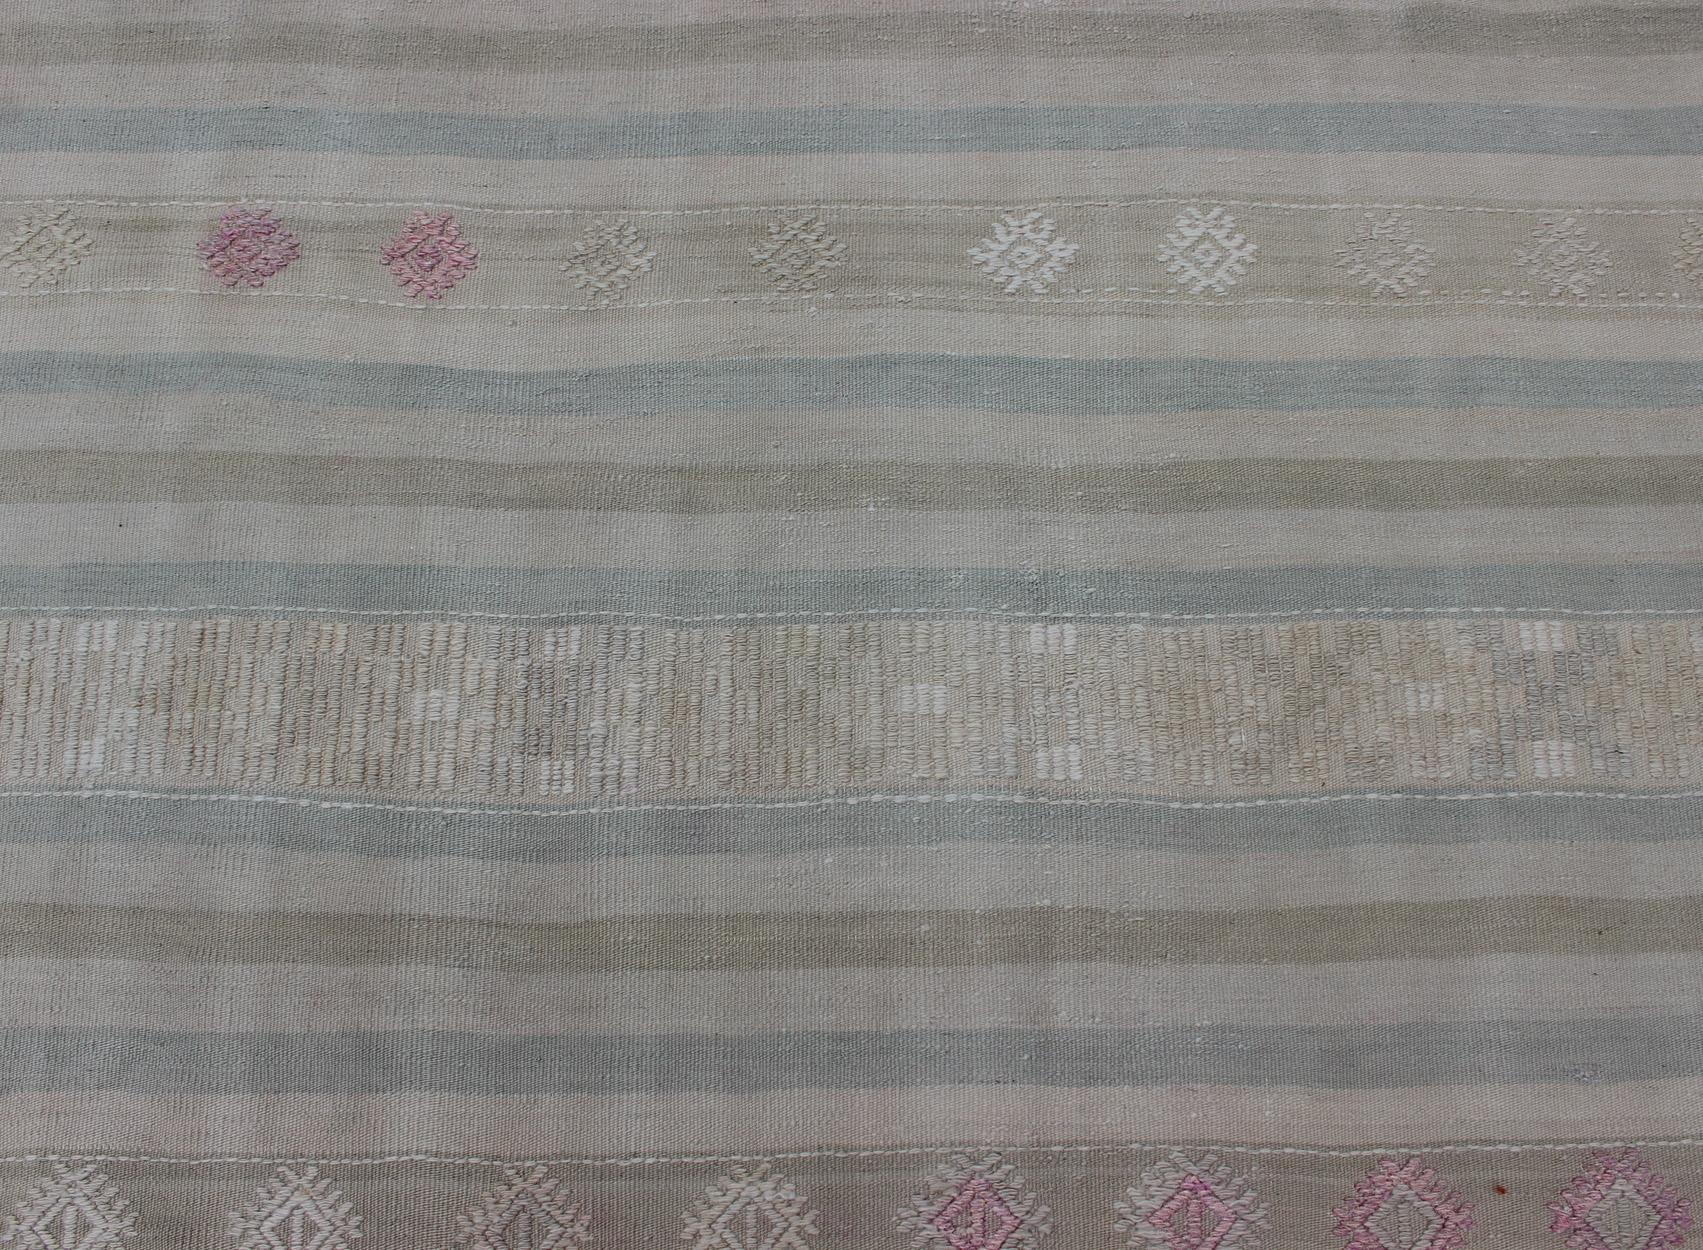 Flat-Weave Kilim with Embroideries in Taupe, Green, Blue and Gray For Sale 4